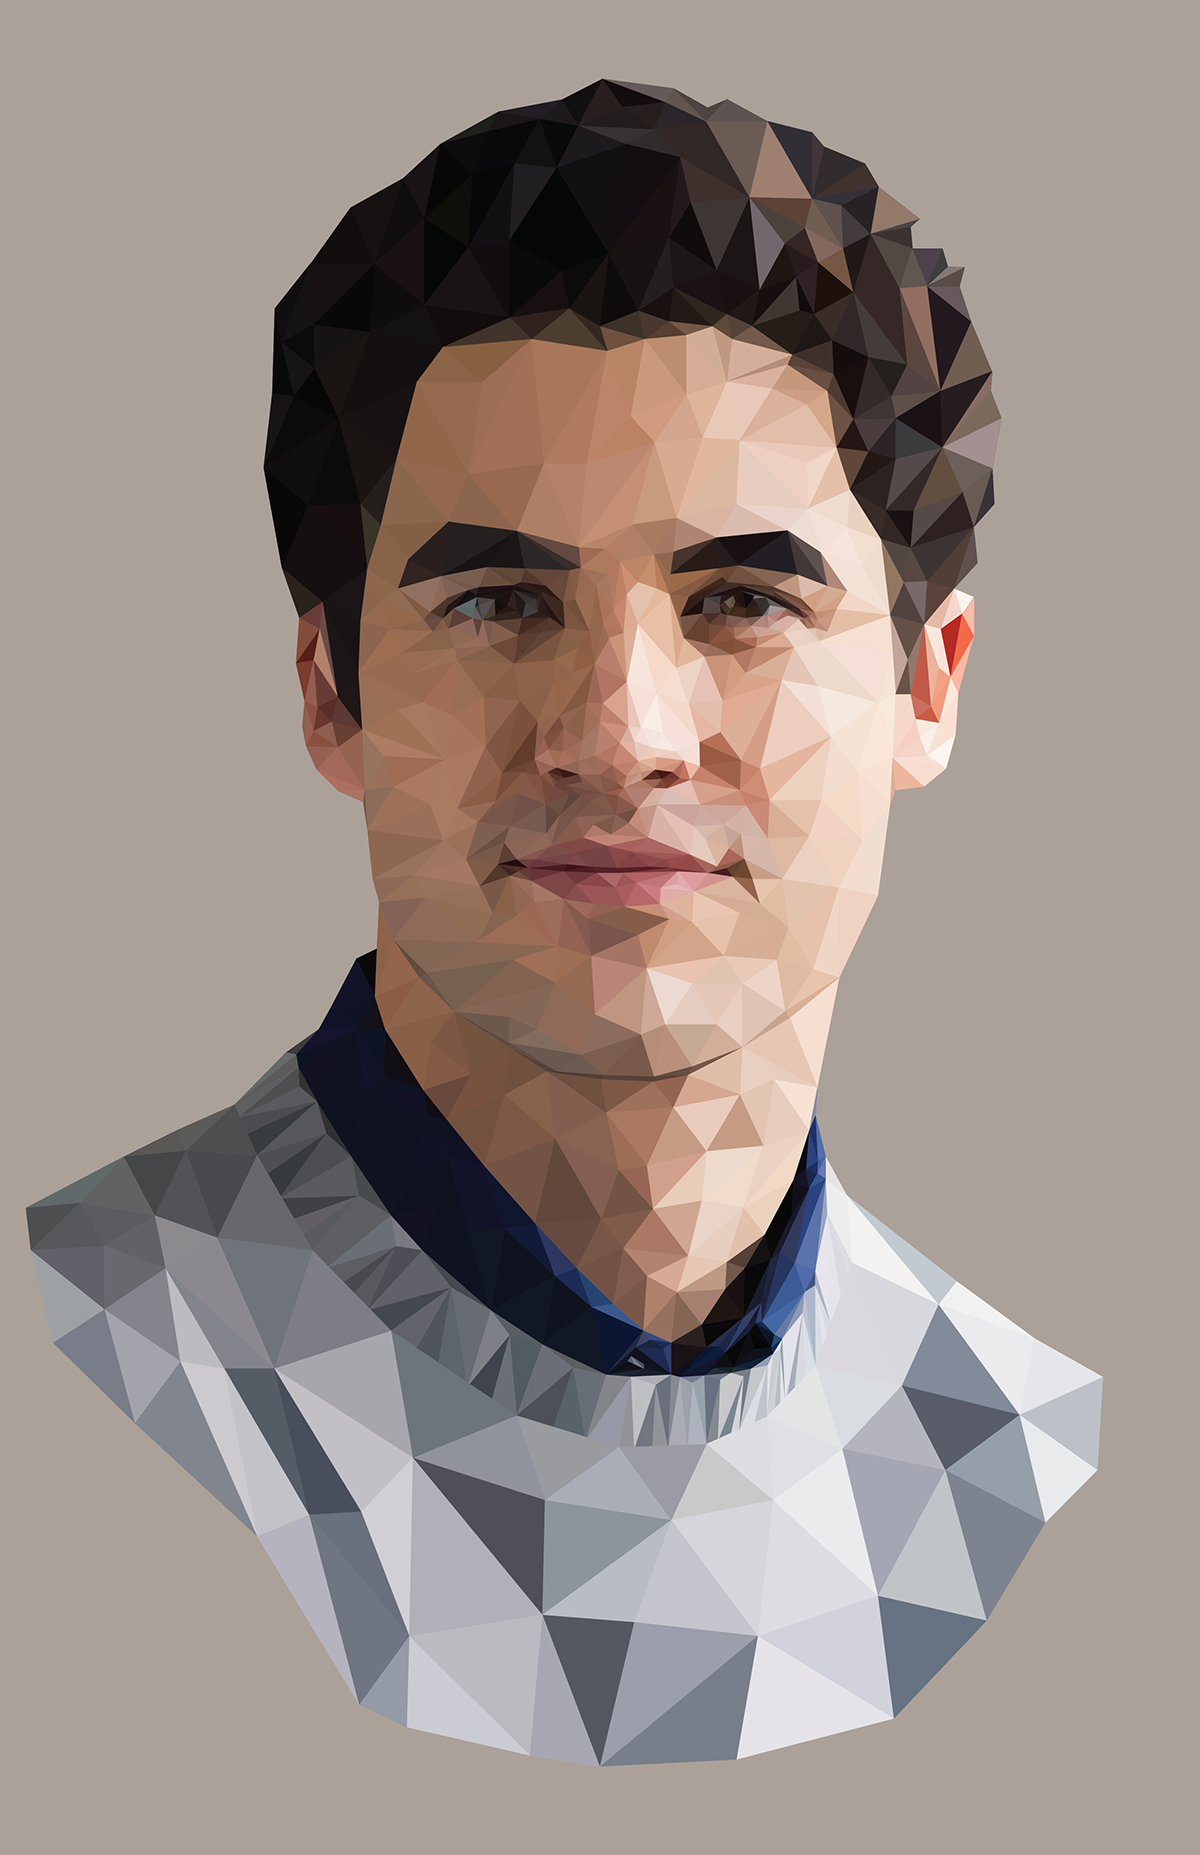 darren Criss darren criss LOW poly Low Poly Glee Blaine anderson blaine anderson